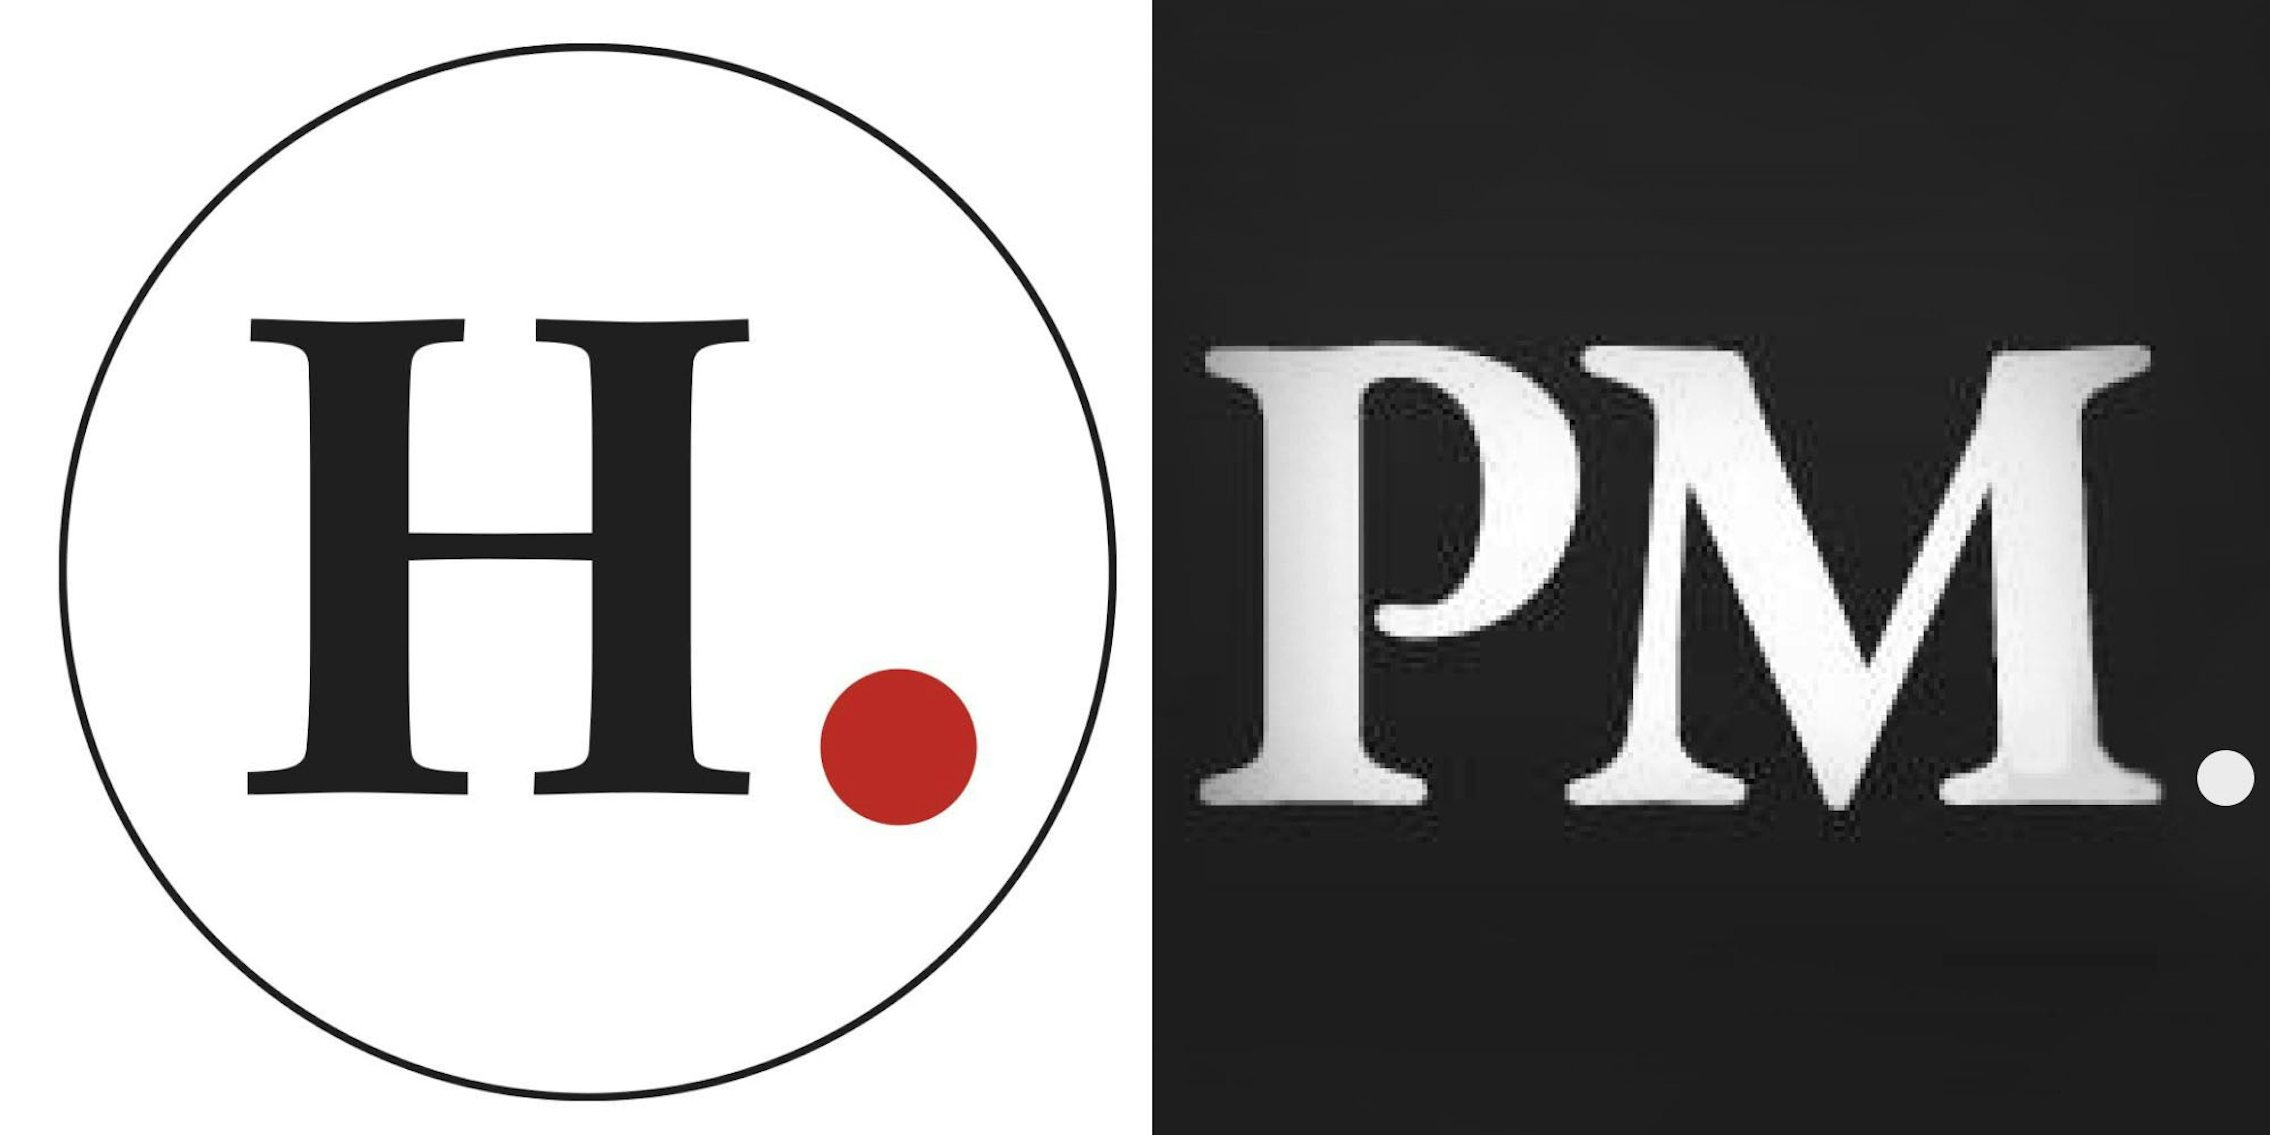 Human Events logo on white background (l) The Post Millennial logo on dark grey background (r)